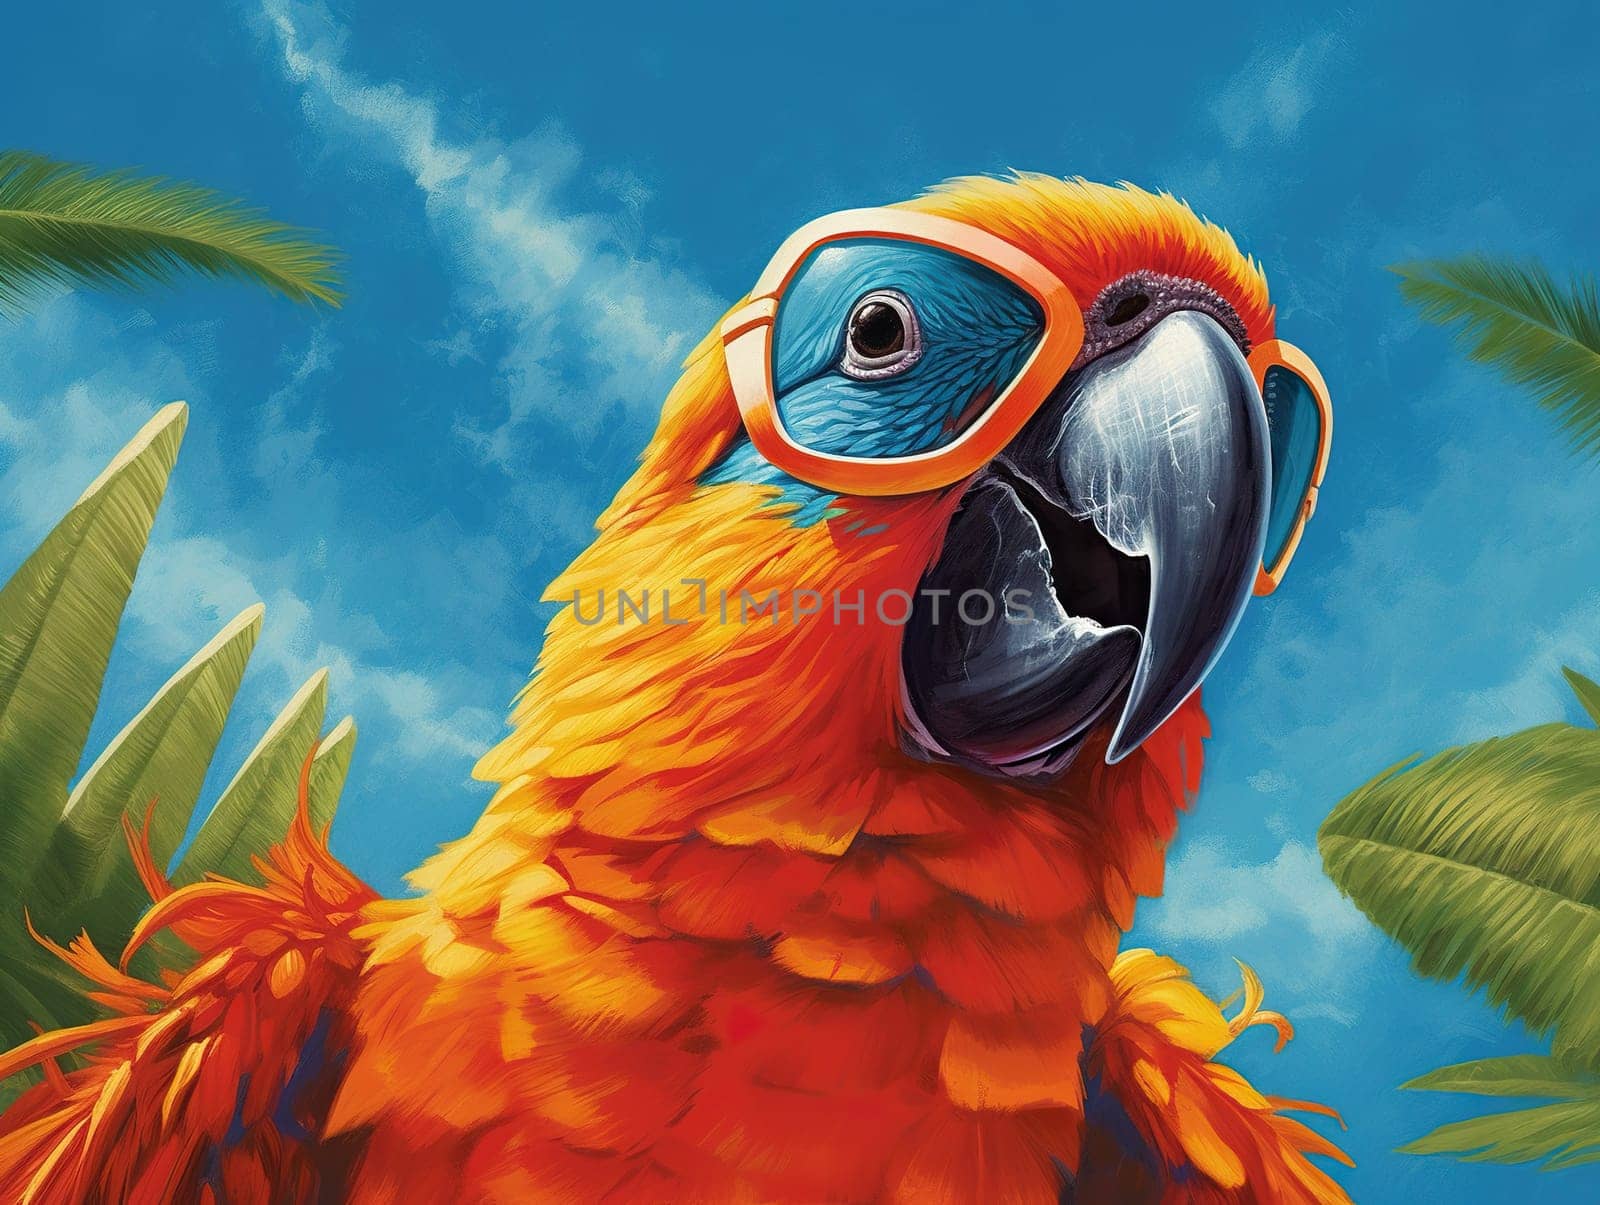 Colorful Art Illustration Of A Smart Parrot With Glasses